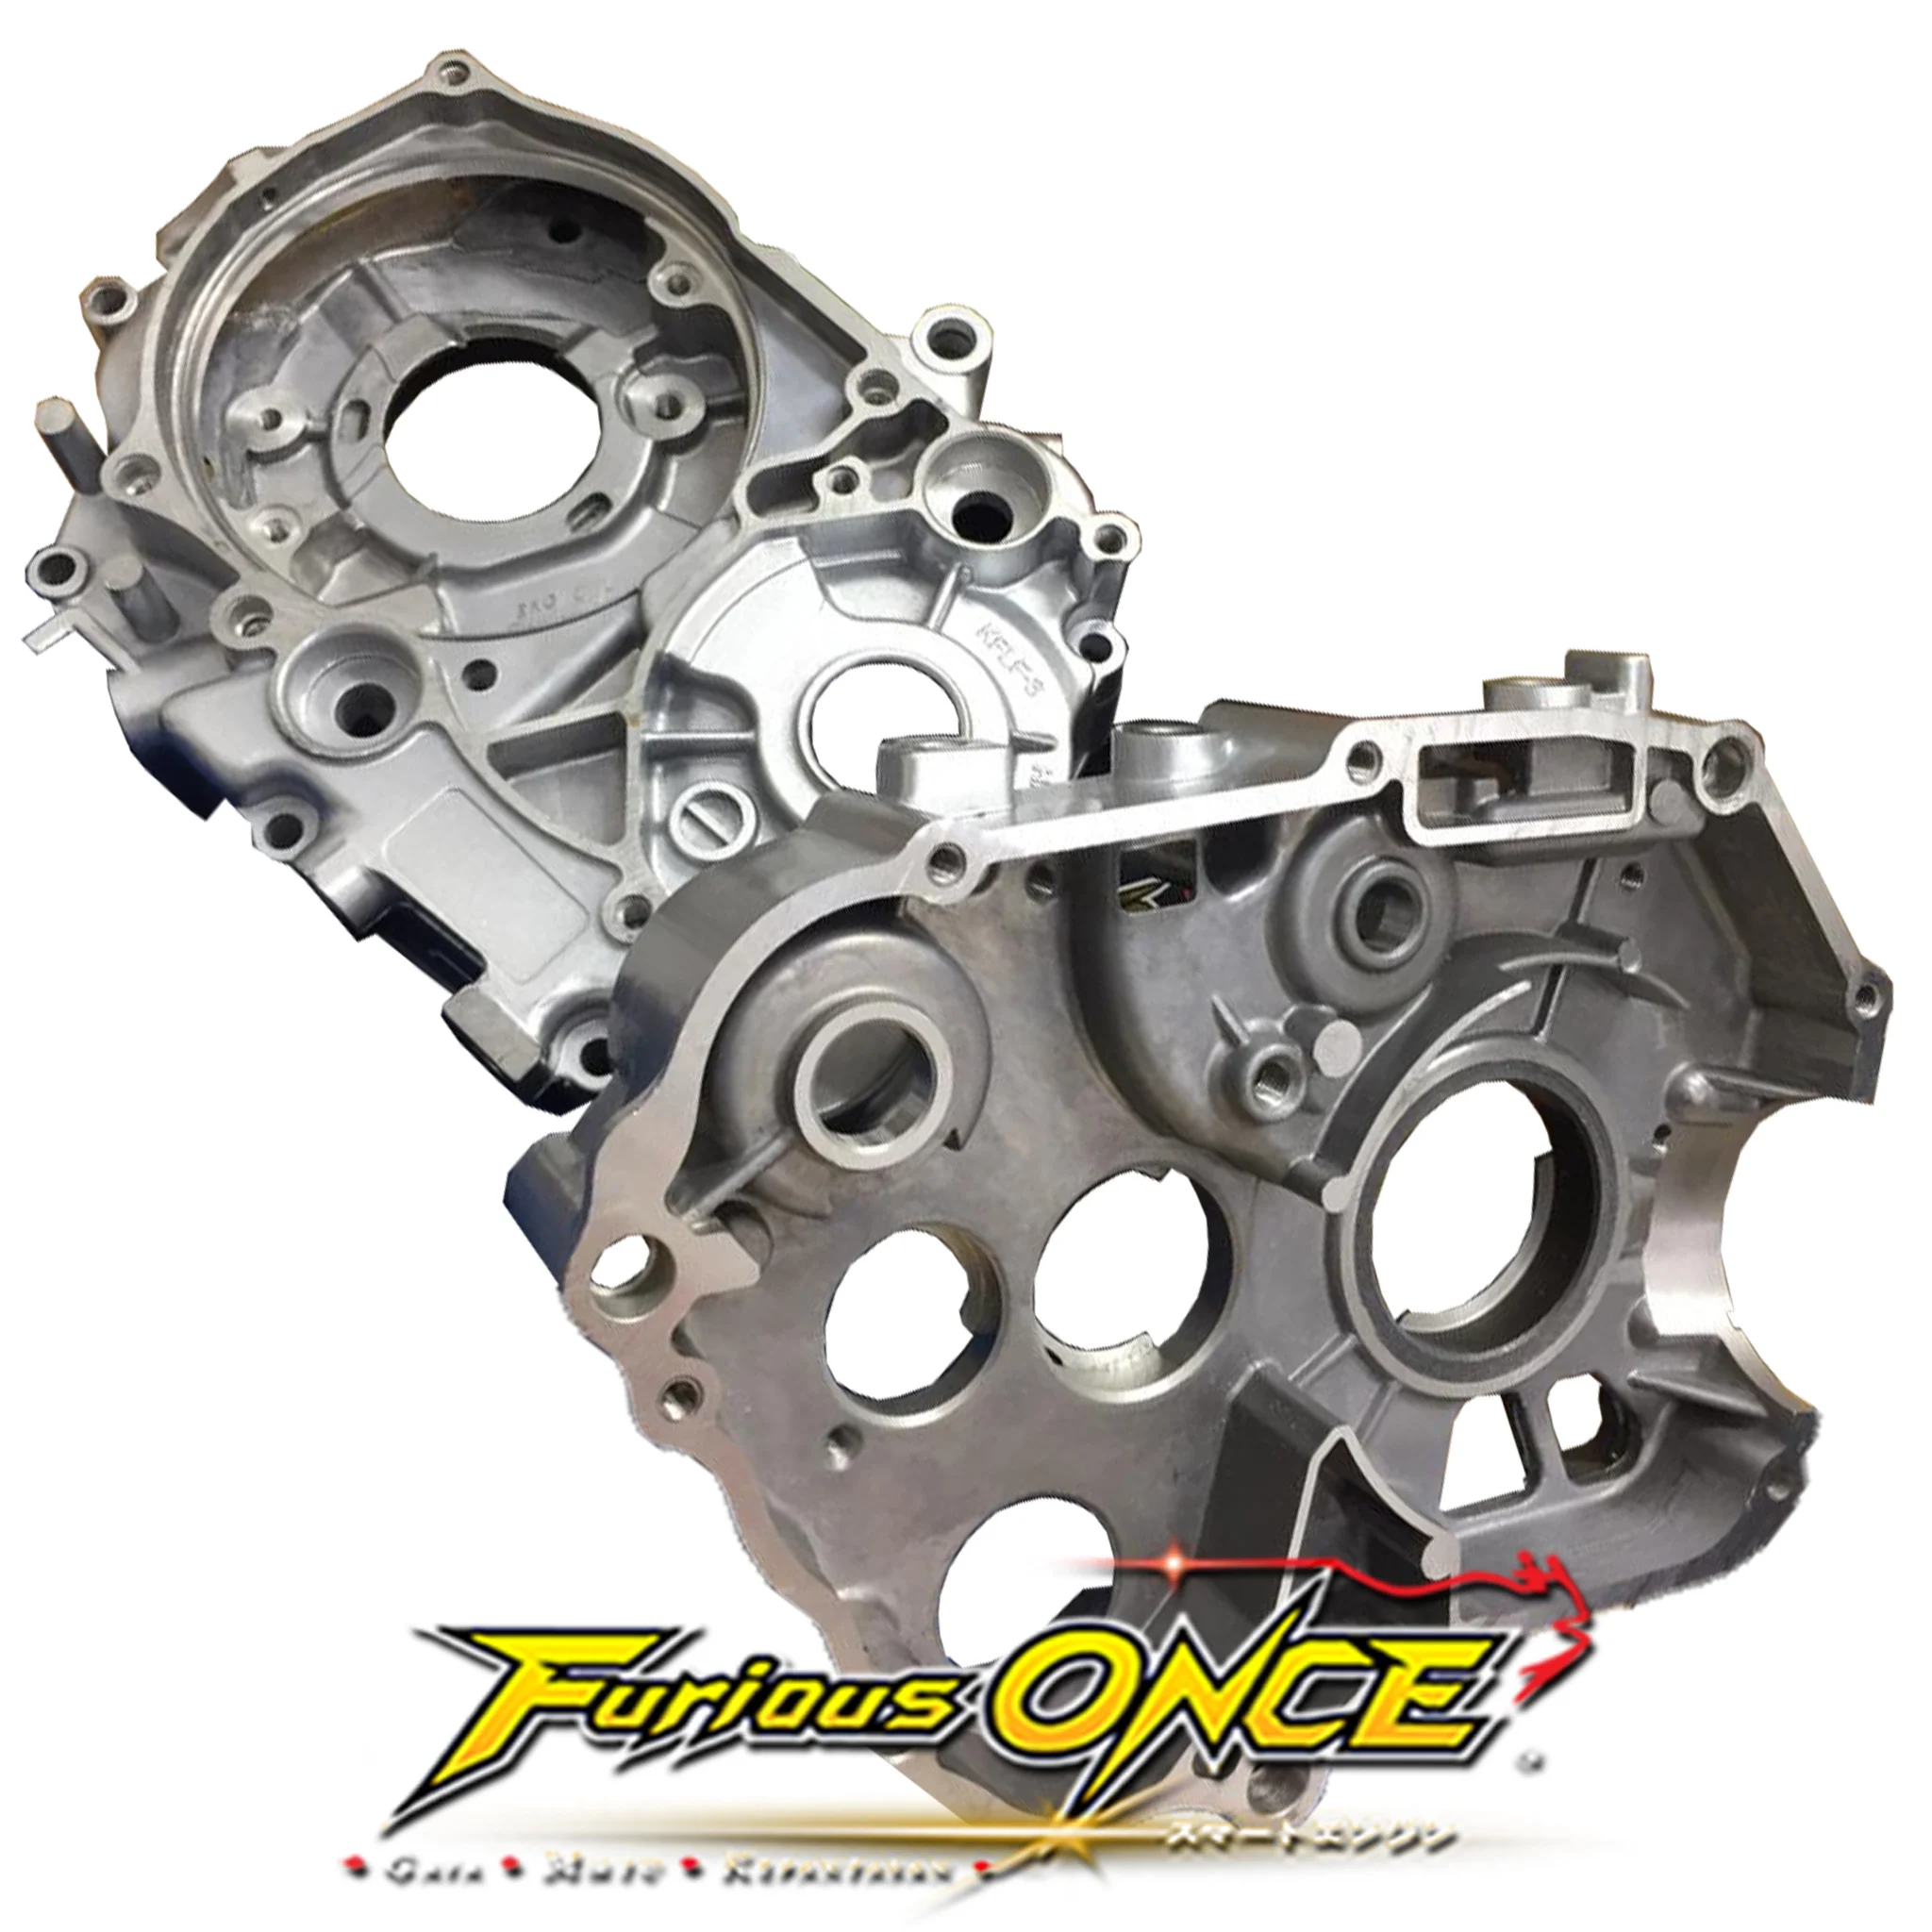 High Quality Class 1 Racing Crankcase Cover Set (LH + RH) Motorcycle Engine Parts / Assembly Supplier